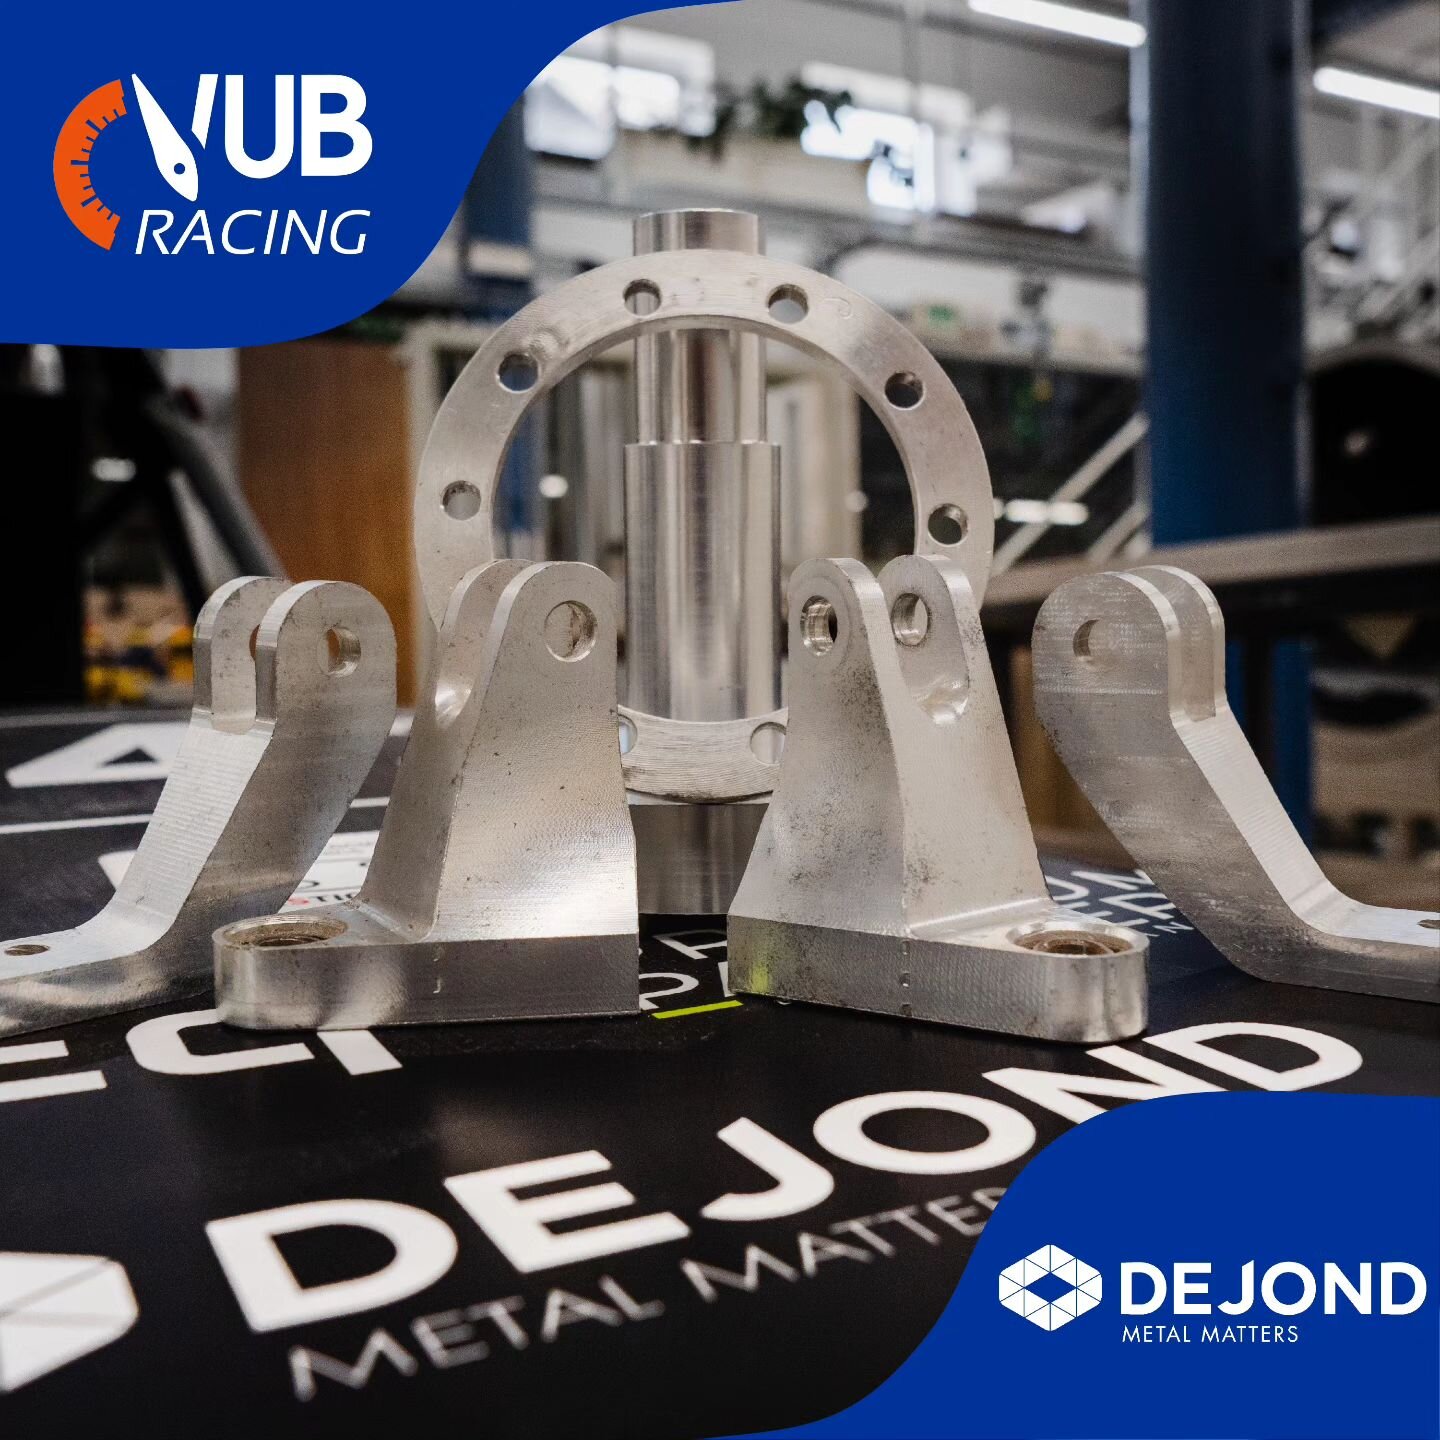 Today we would like to put our partner @dejondnv in the spotlight. Thanks to the materials they provide the team is able to manufacture components for our suspension and transmission in-house. Keeping us focused on our built not bought mentality. 

#